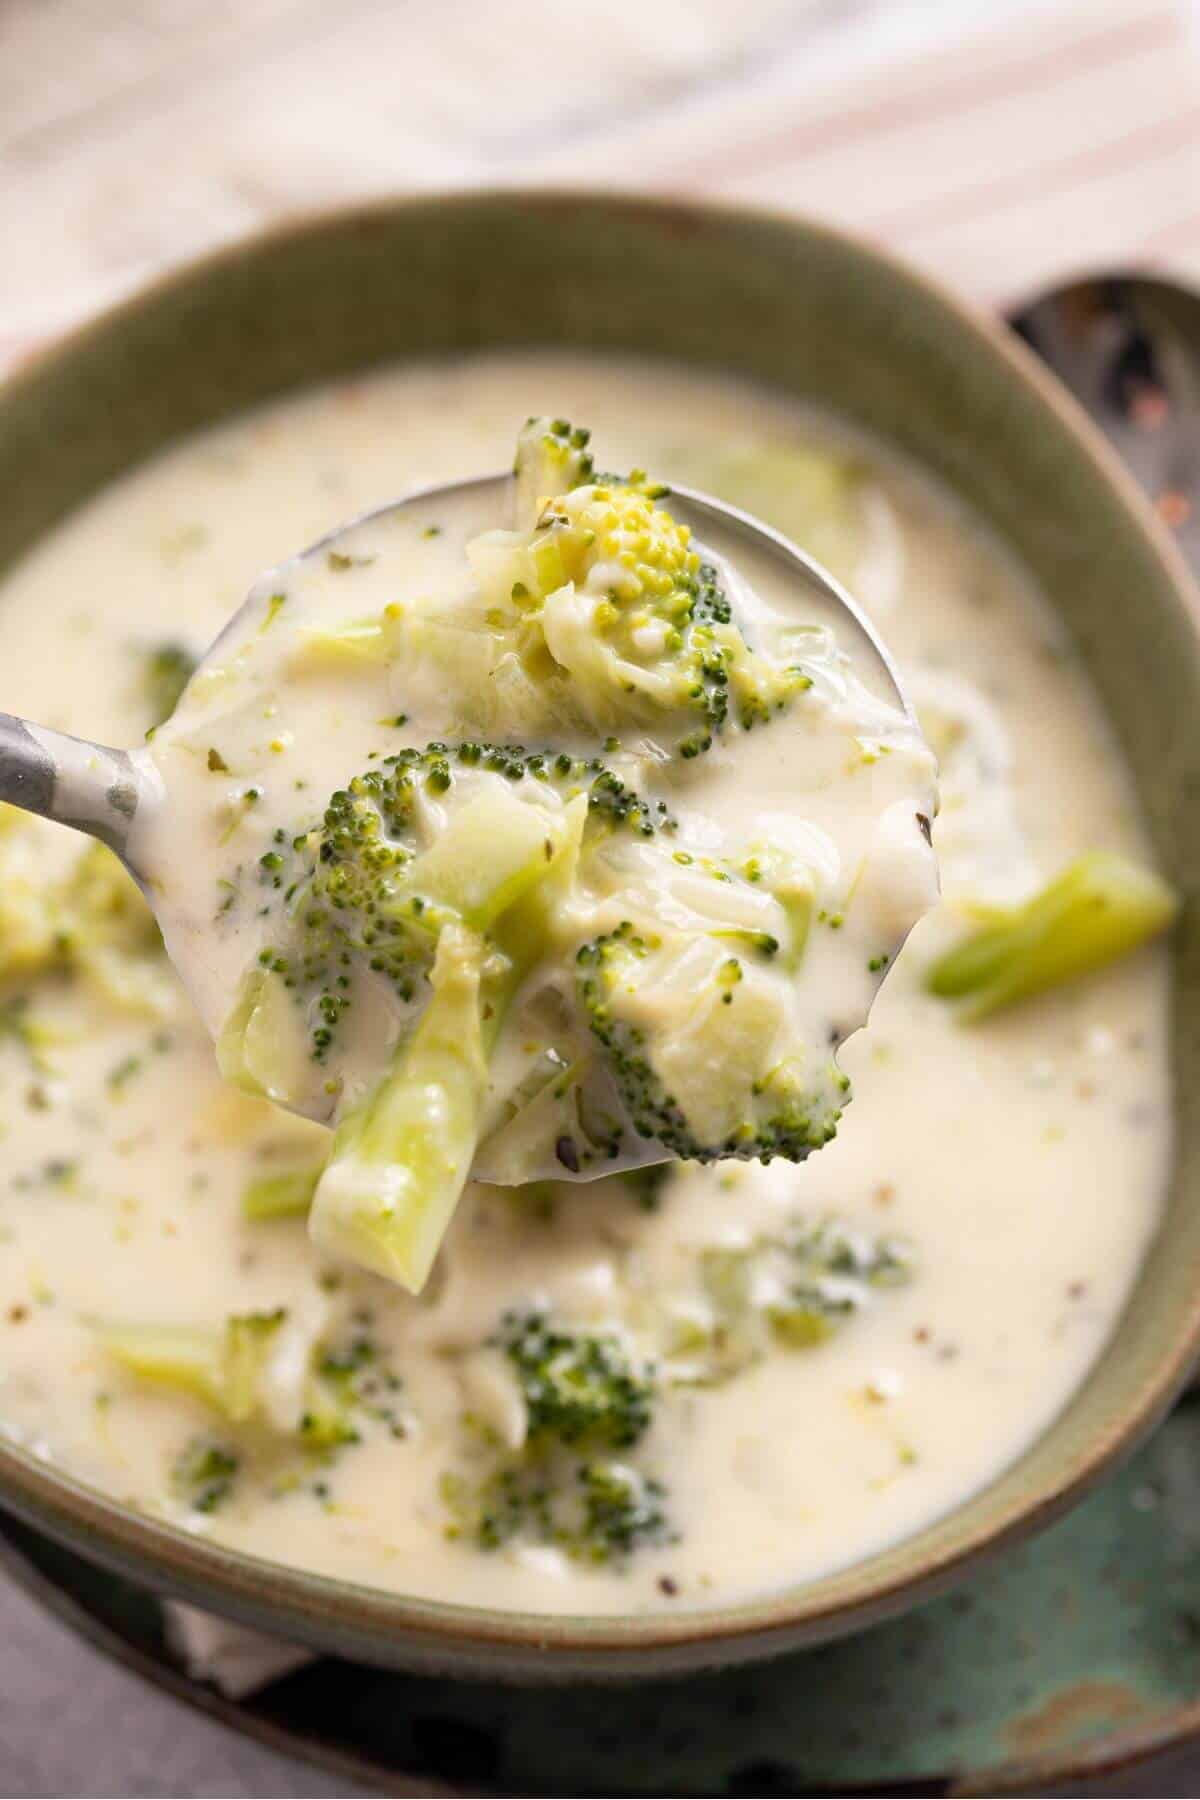 A bowl of broccoli soup with a spoon.